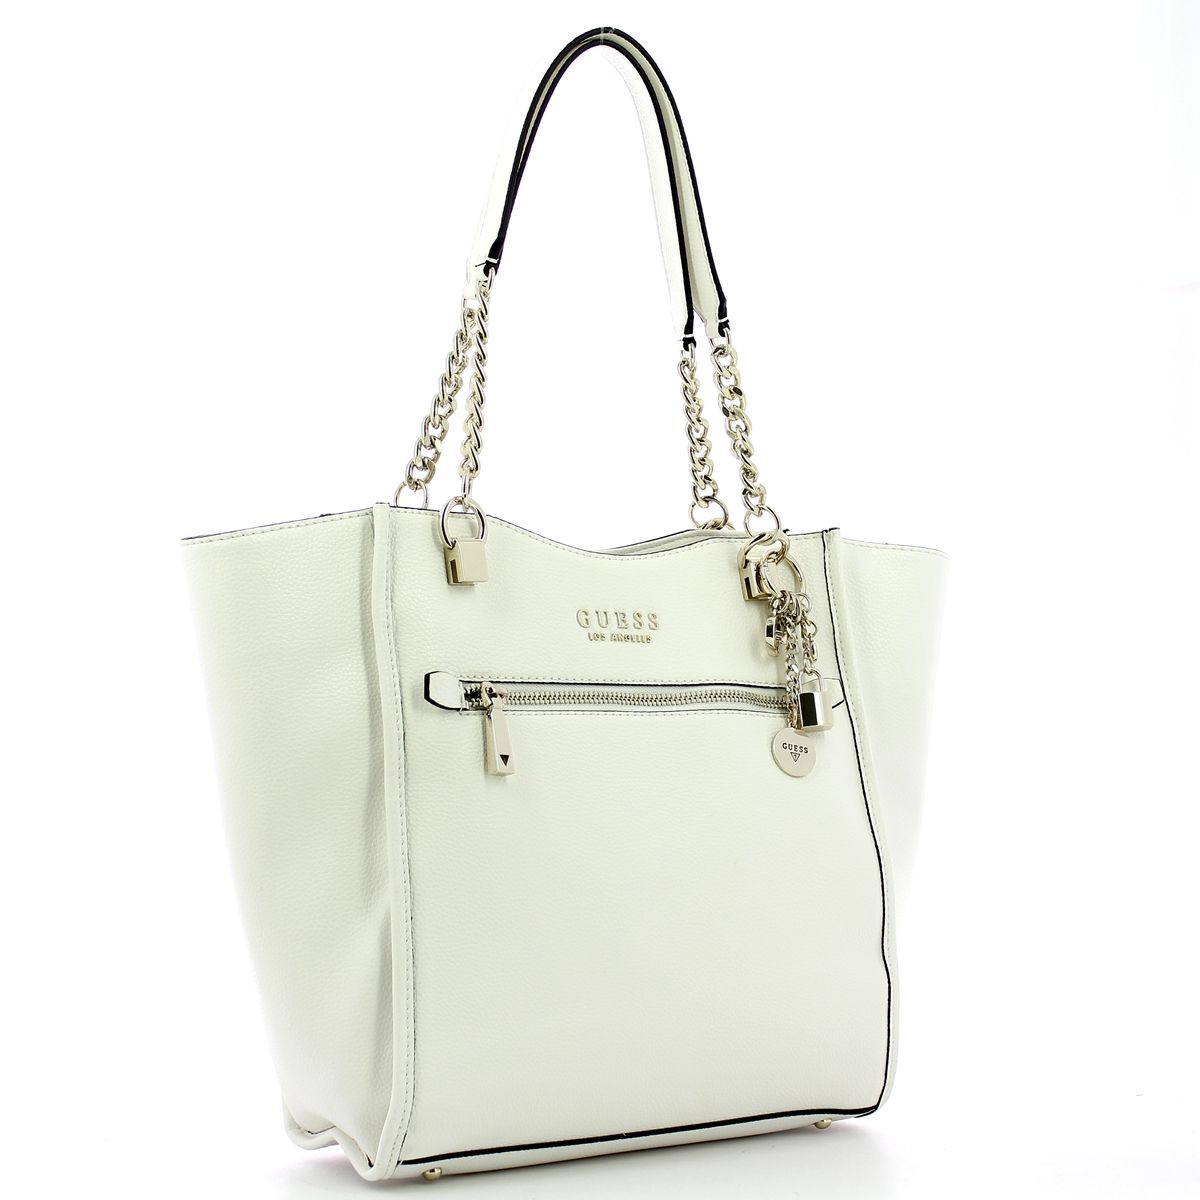 Lias Elite Carryall Guess, faux leather shoulderbag with zipped compartment, inner lining, front and inner pocket, and locket charm.